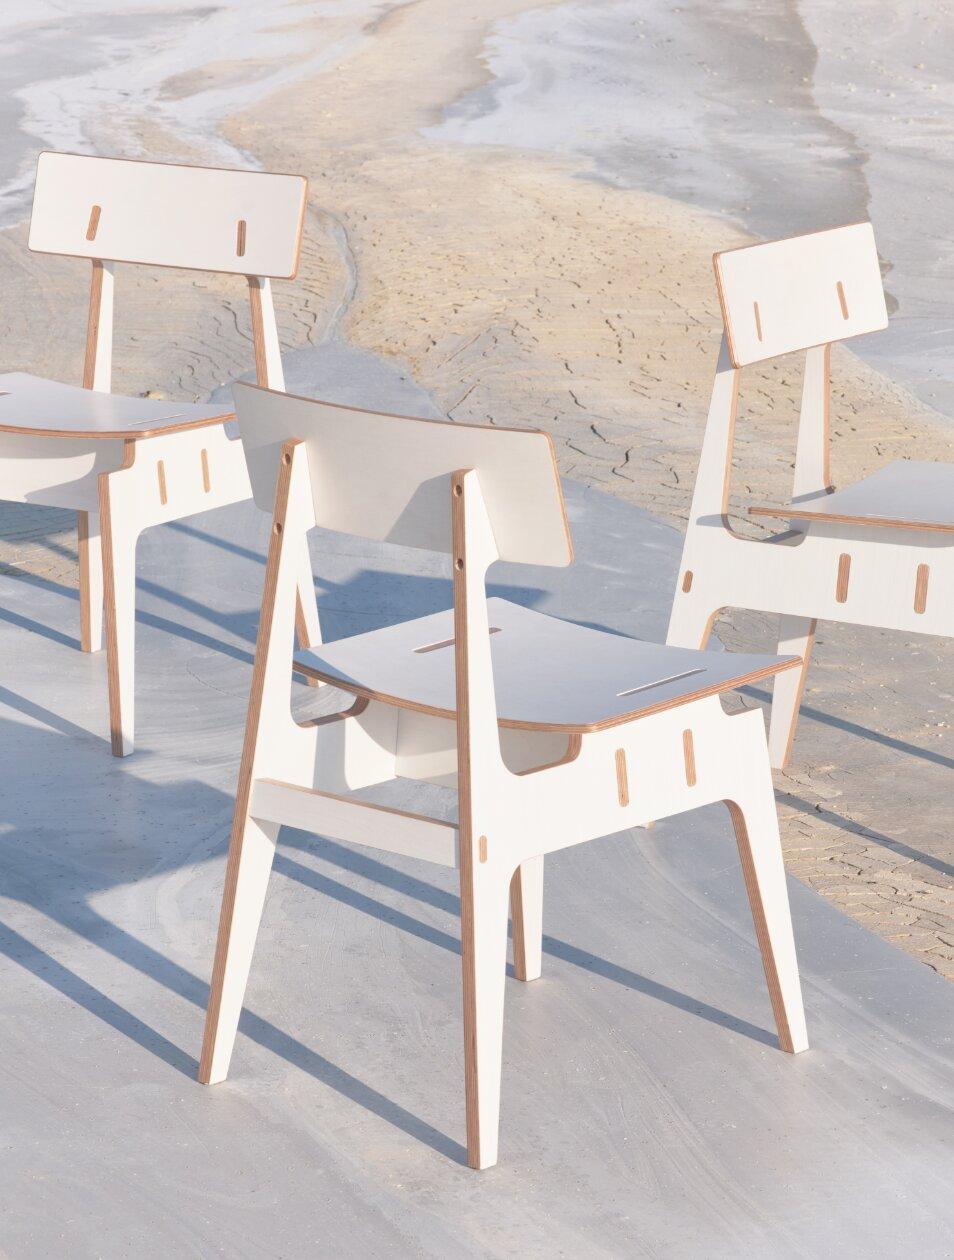 Hand-Painted Langskip and Leidangskip Chair made from Birch Multiplex Boards For Sale